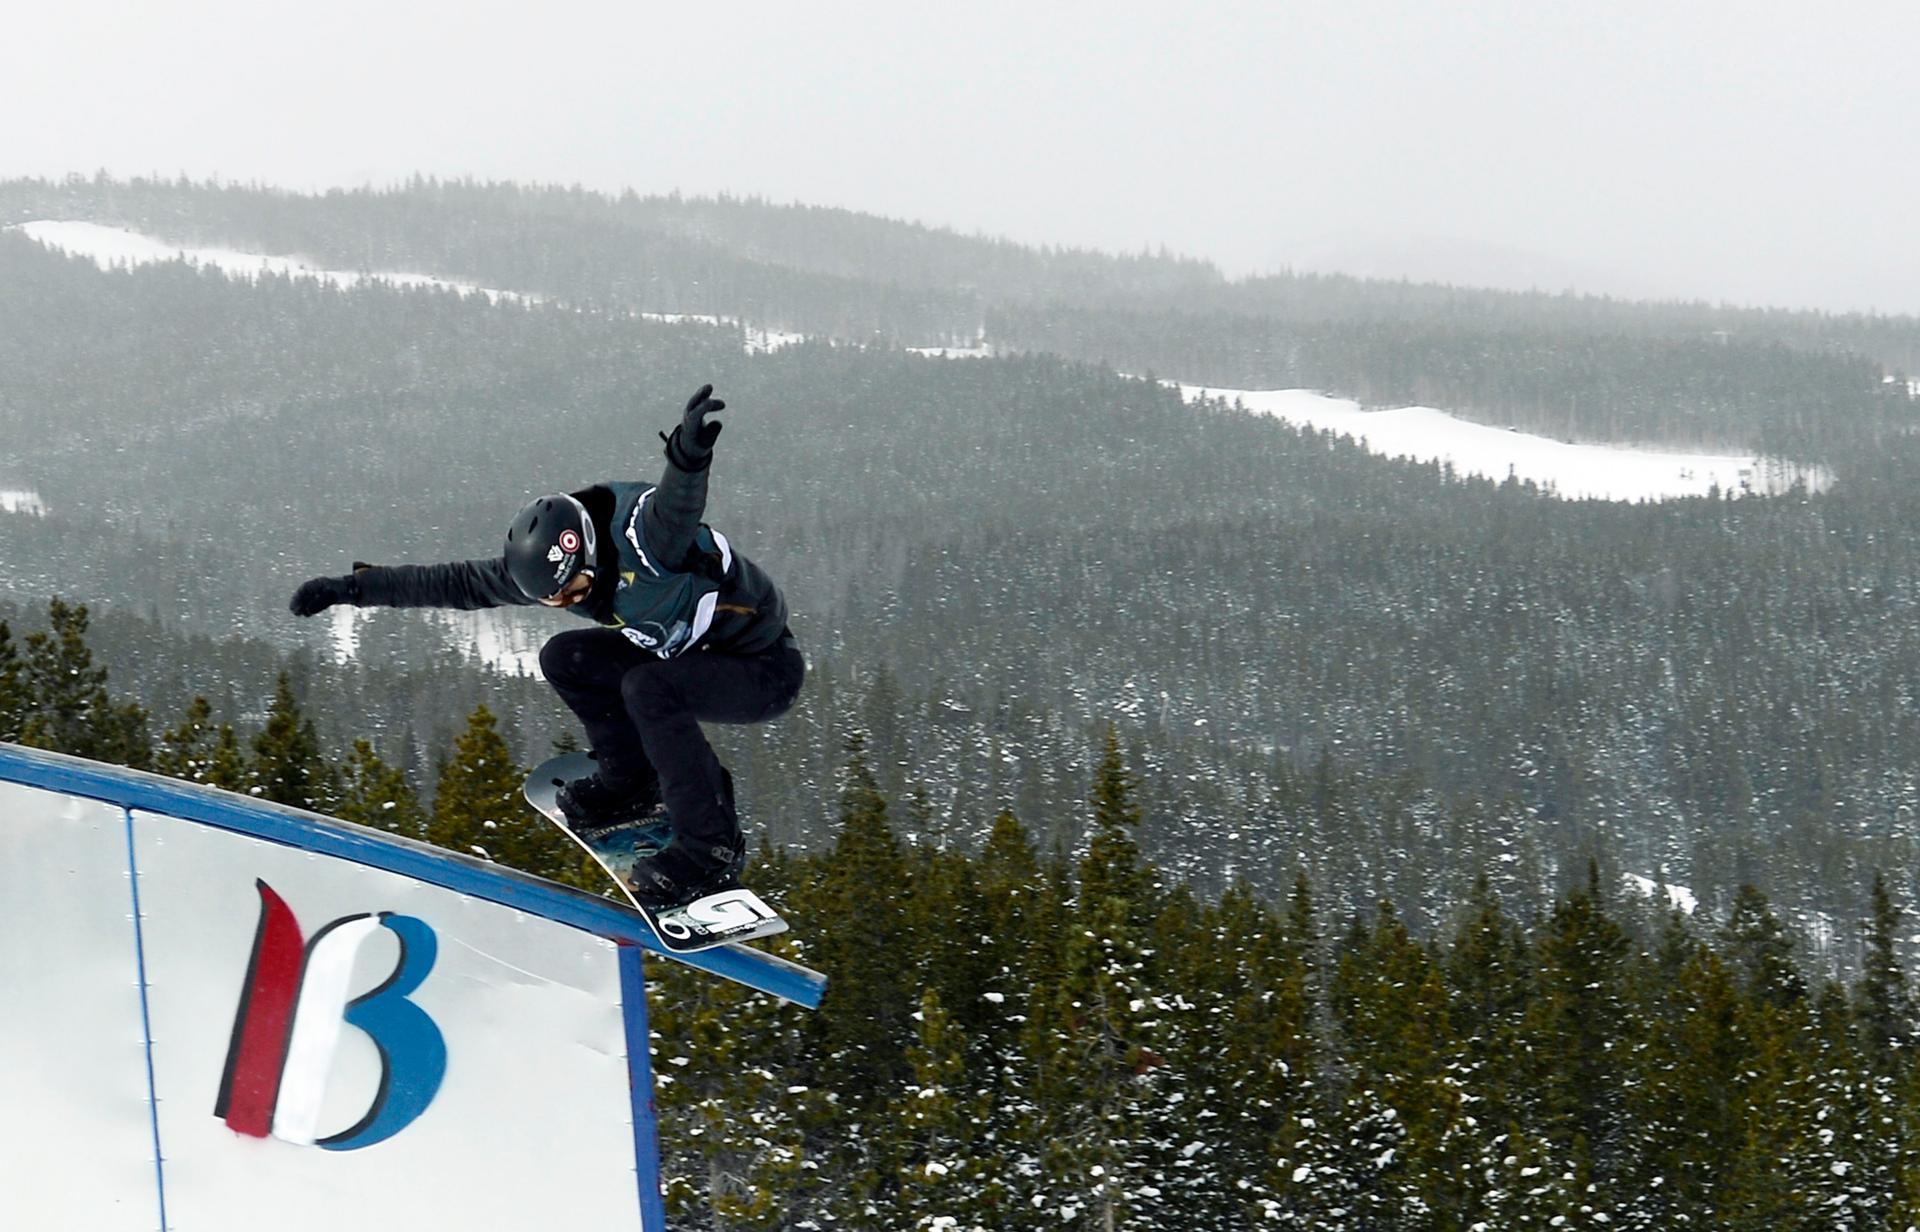 Shaun White competes during slopestyle qualifying for the US Grand Prix at Breckenridge Ski Resort in Colorado.